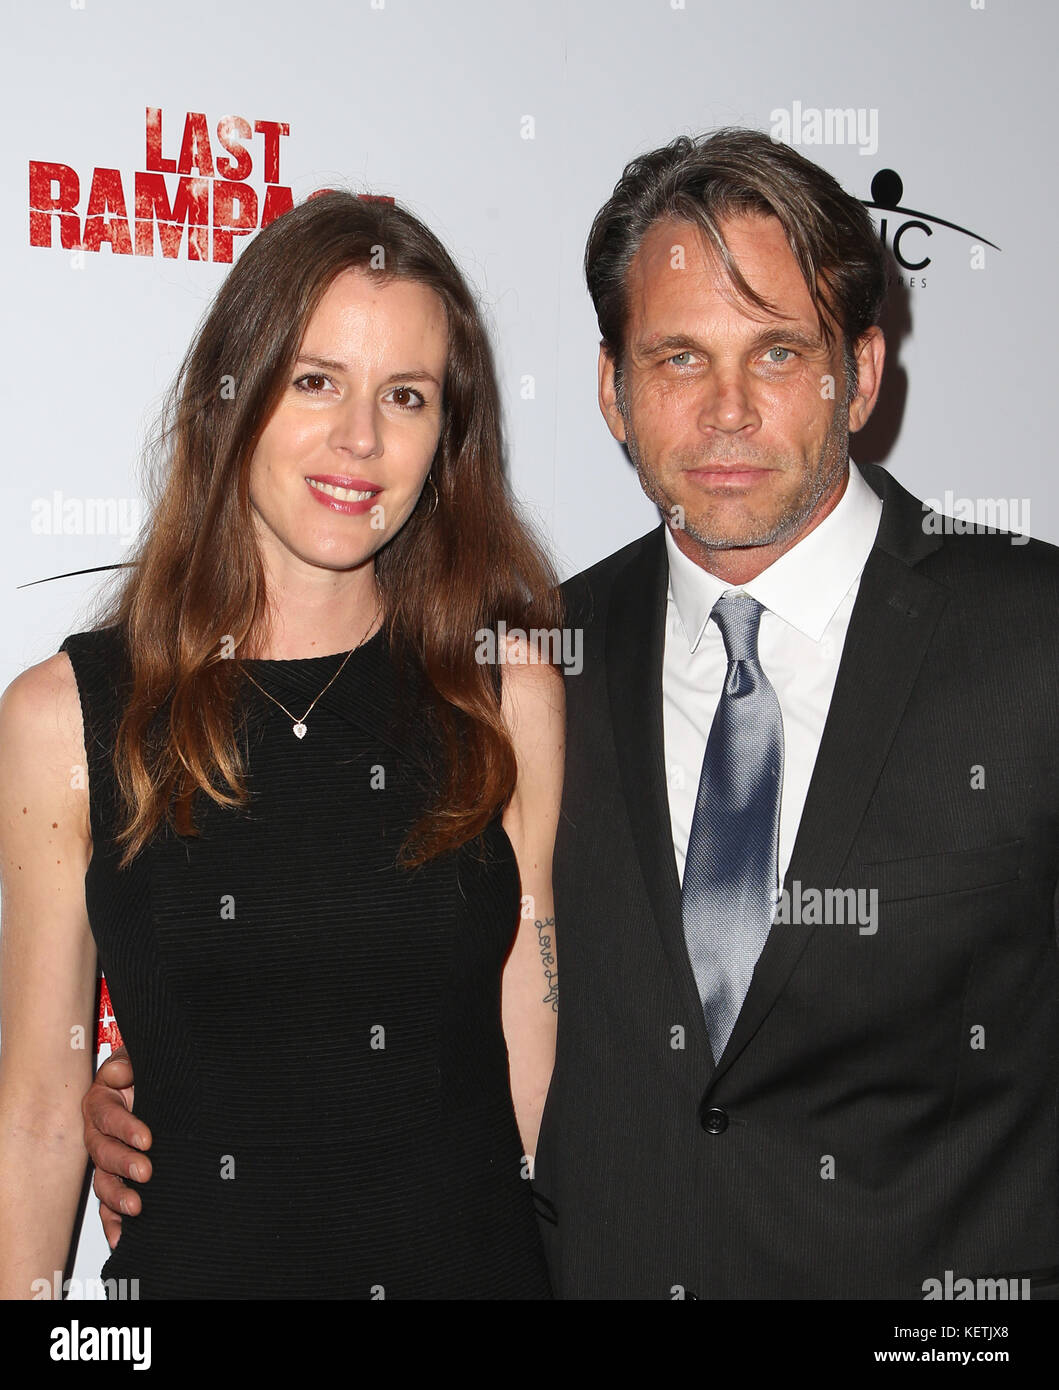 Premiere Of Epic Pictures Releasings' 'Last Rampage'  Featuring: Chris Browning, Guest Where: Hollywood, California, United States When: 21 Sep 2017 Credit: FayesVision/WENN.com Stock Photo